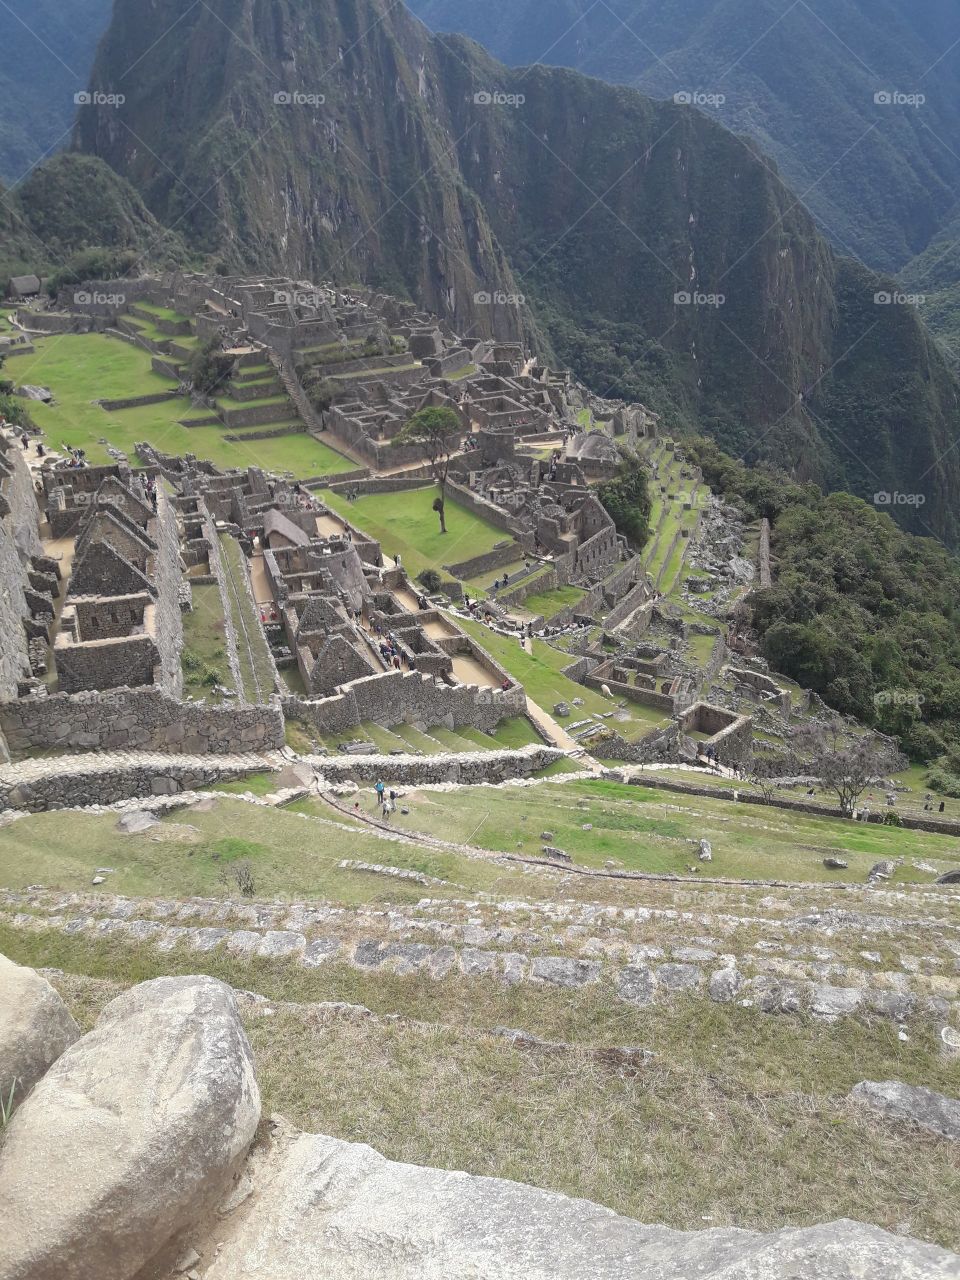 machu picchu from a different angle